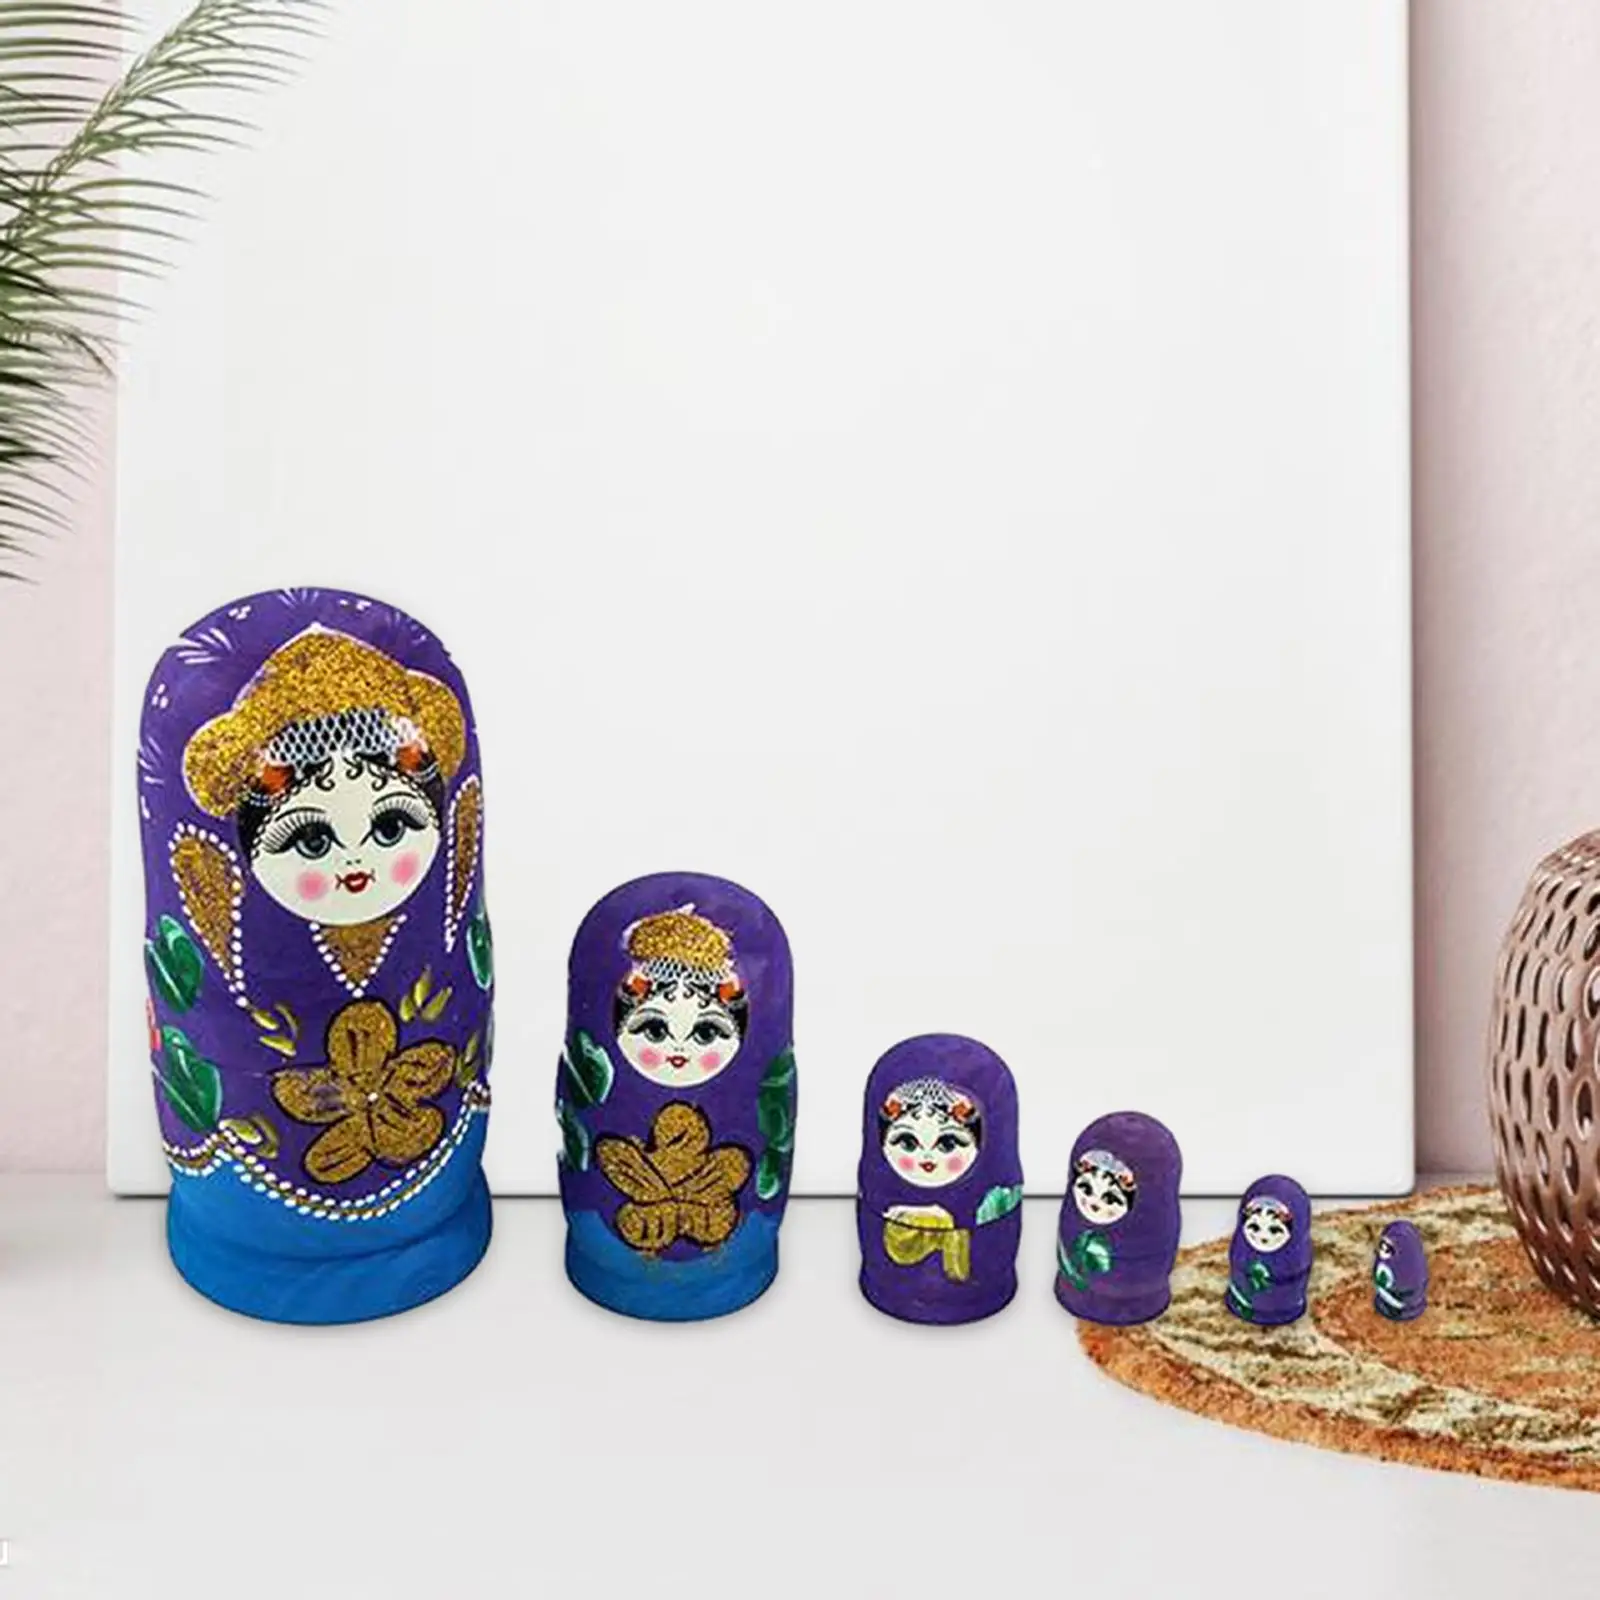 7 Pieces Nesting Doll Wood Stacking Nested Set for Easter Home Decoration